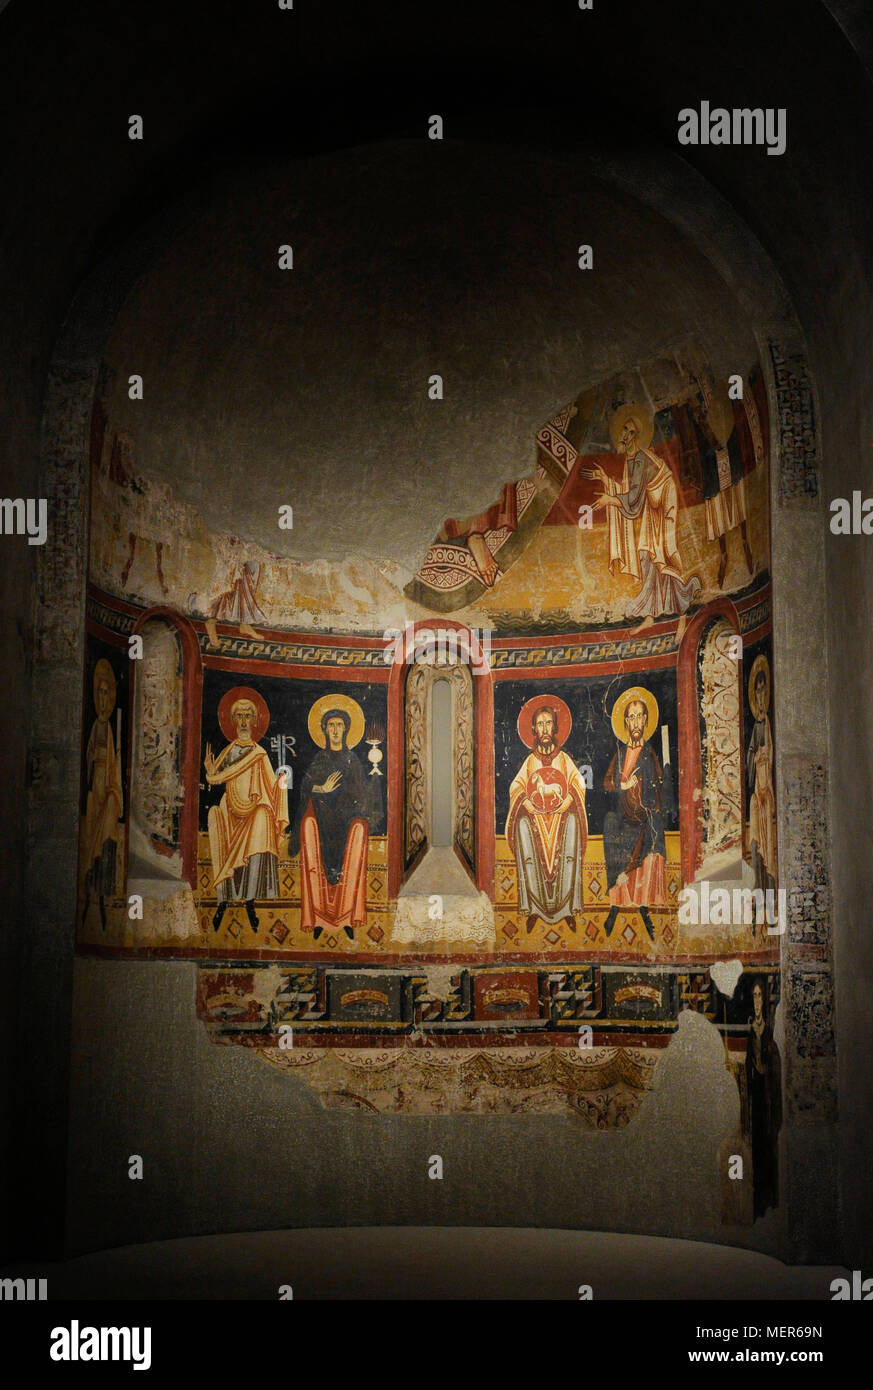 Circle of the Master of Pedret. Main apse of the Burgal (late 11th century-early 12th century). Fresco depicting Saint Peter and the Virgin with chalice (left) and Saint John the Baptist and Saint Paul (right). Romanesque. Fresco transferred to canvas. From the old Church of Sant Pere del Burgal (la Guingueta Aneu, province of Lleida, Spain). National Museum of Art of Catalonia (MNAC). Barcelona. Catalonia. Spain. Stock Photo